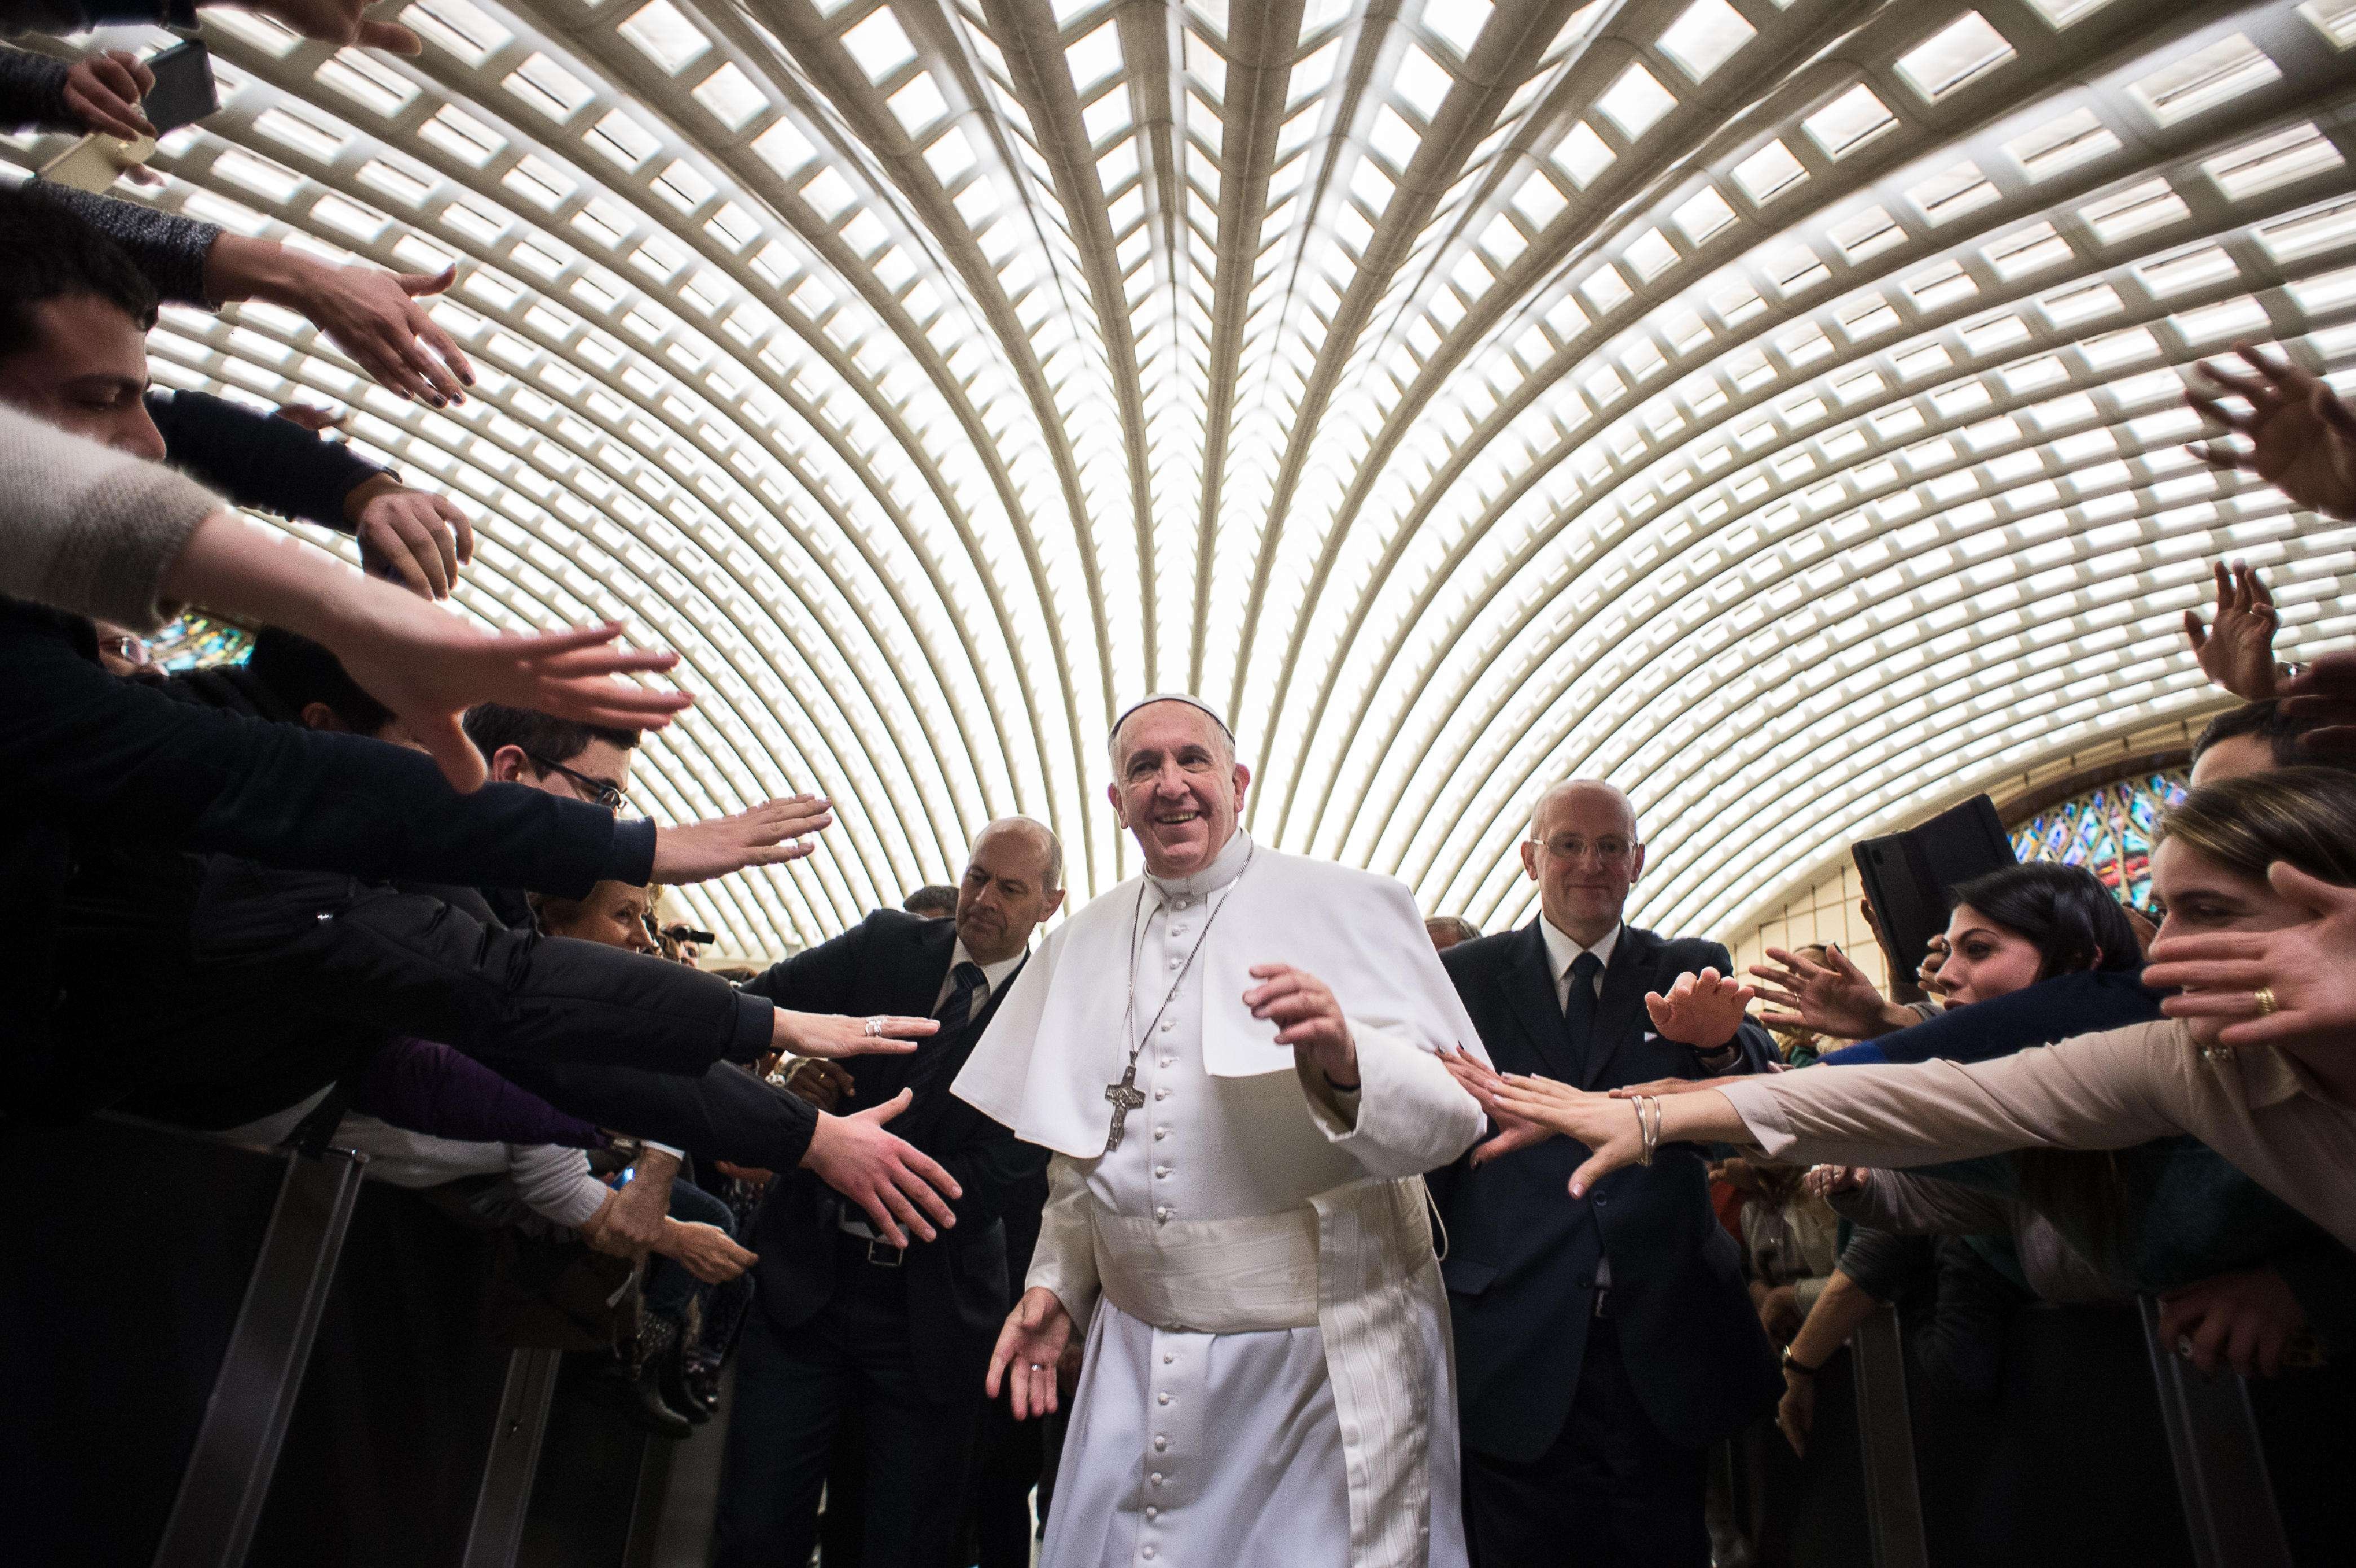 Pope Francis attends a special audience for the Cassano allo Jonio diocese at the Vatican on Feb.21, 2015. (Osservatore Romano— Vatican Press Office/AFP/Getty Images)